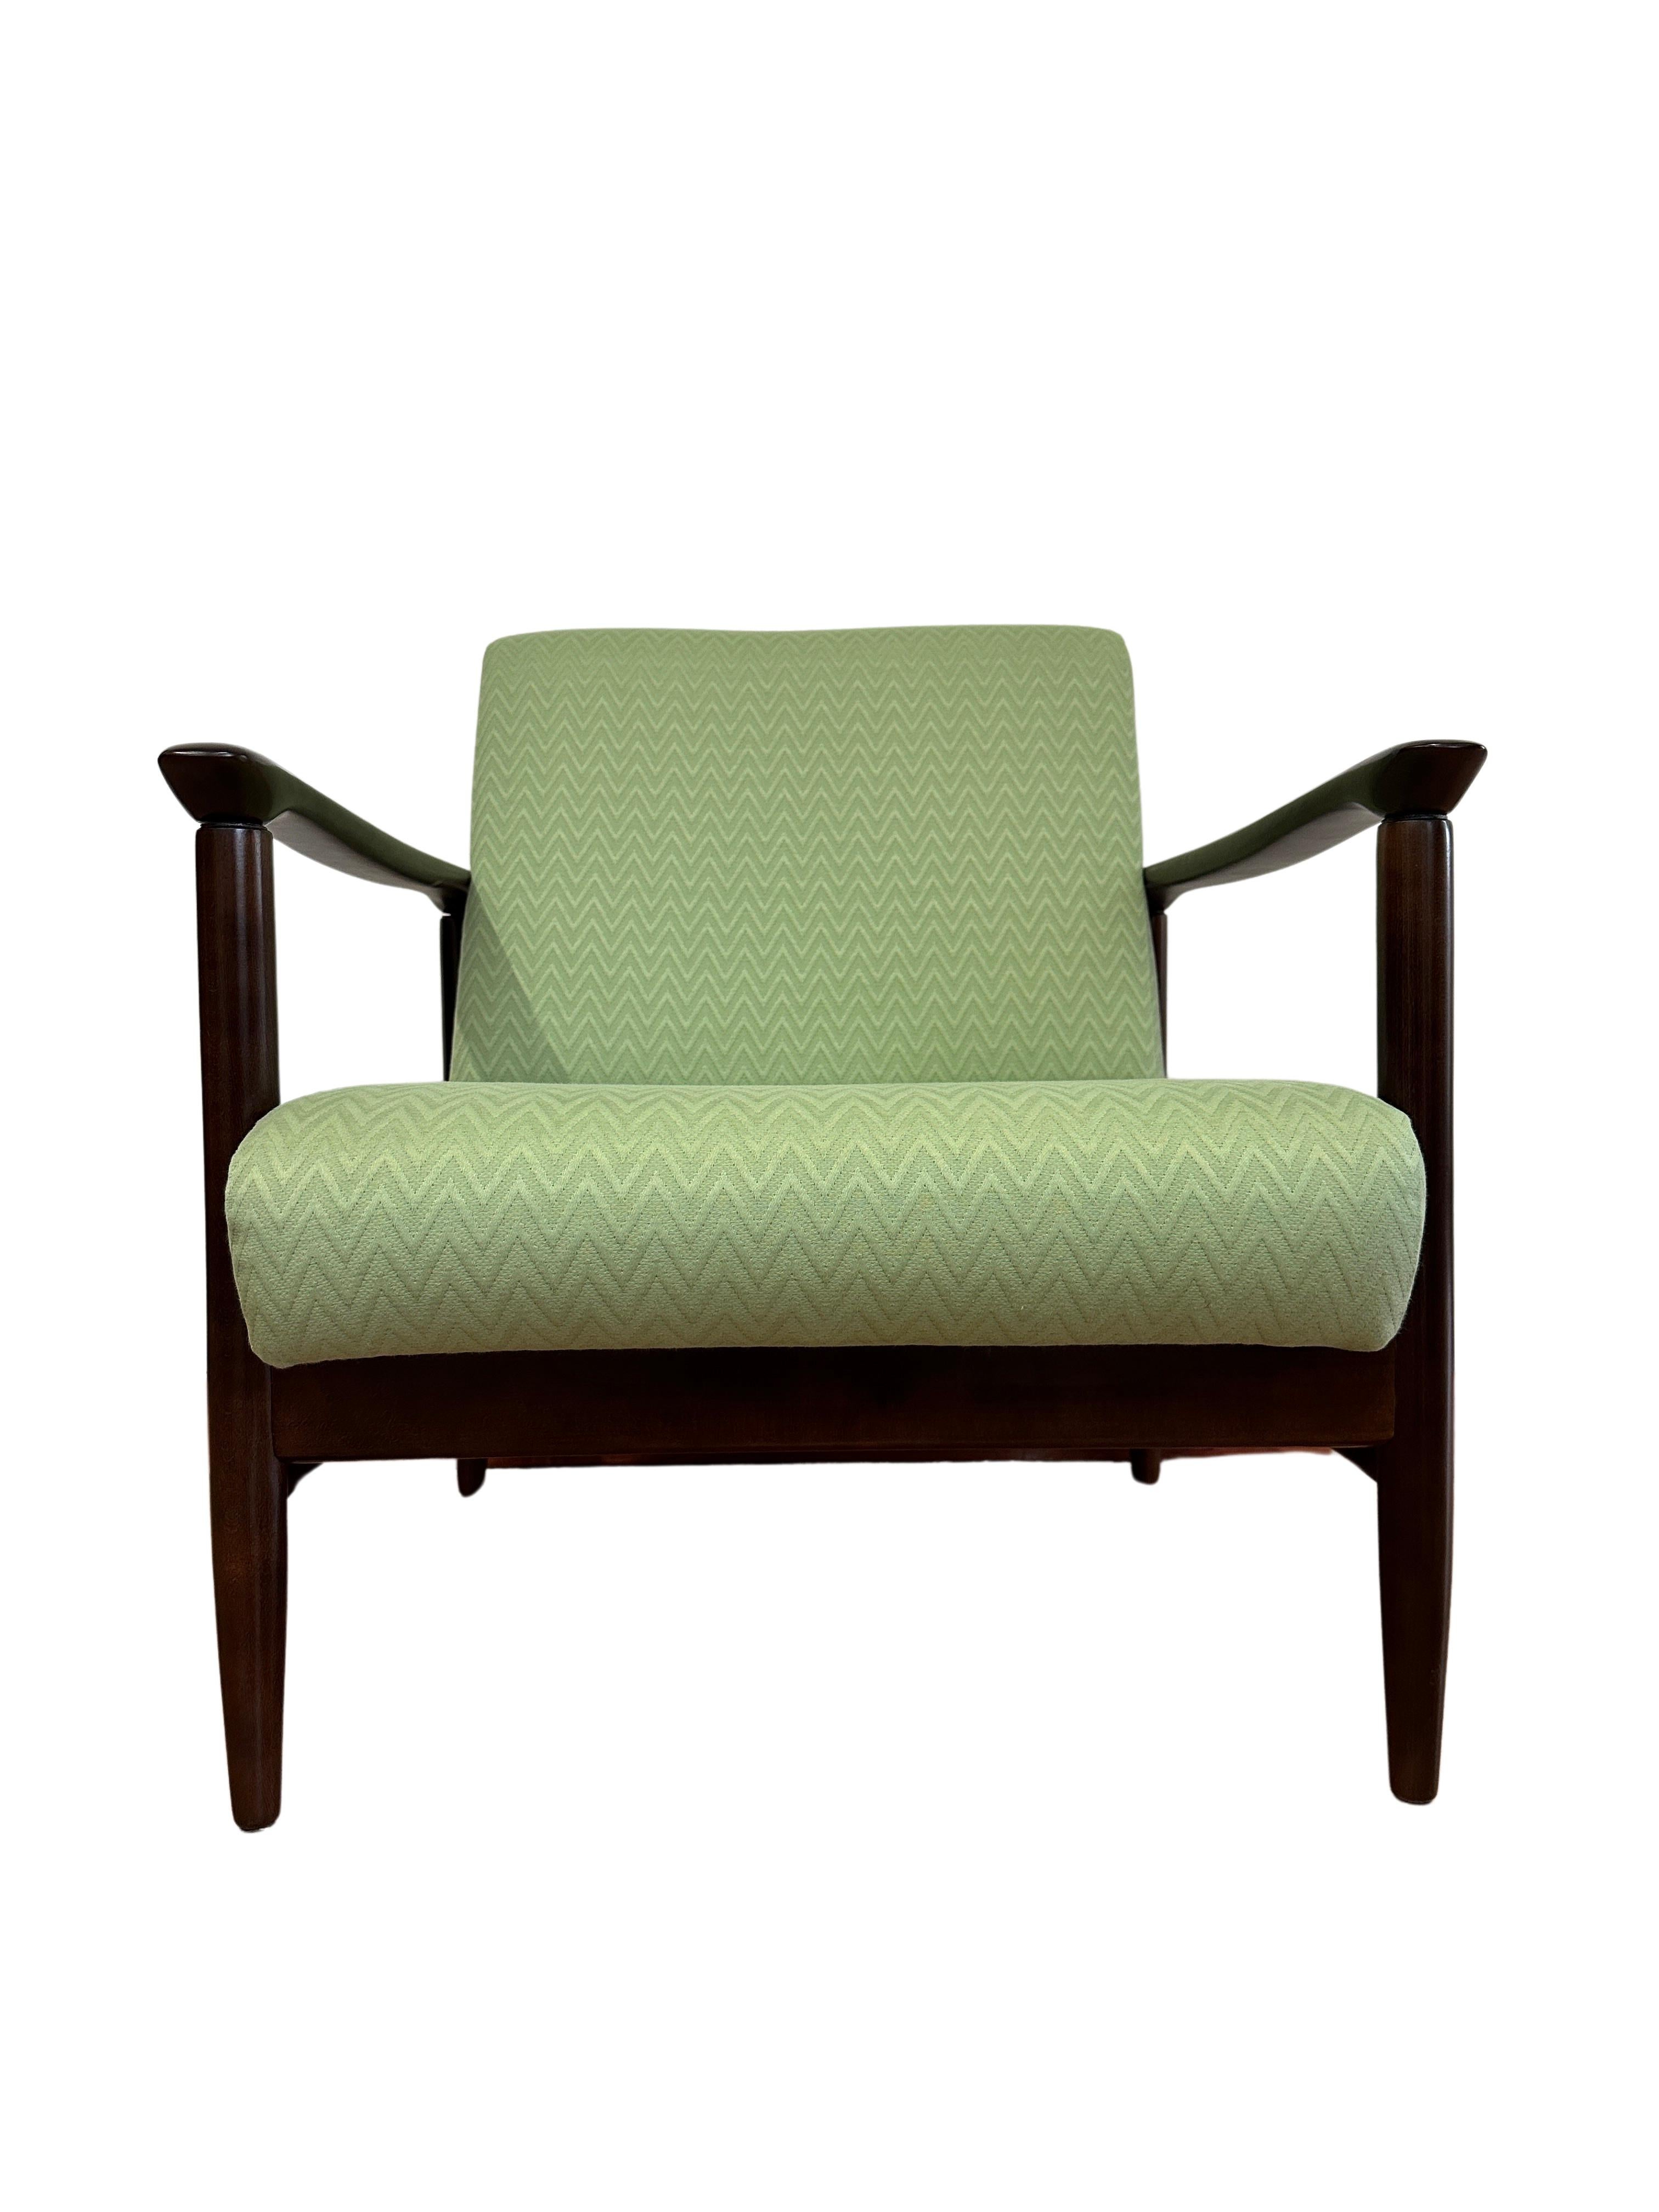 Mid Century Armchair in Green Missoni Upholstery, by Edmund Homa, 1960s For Sale 5